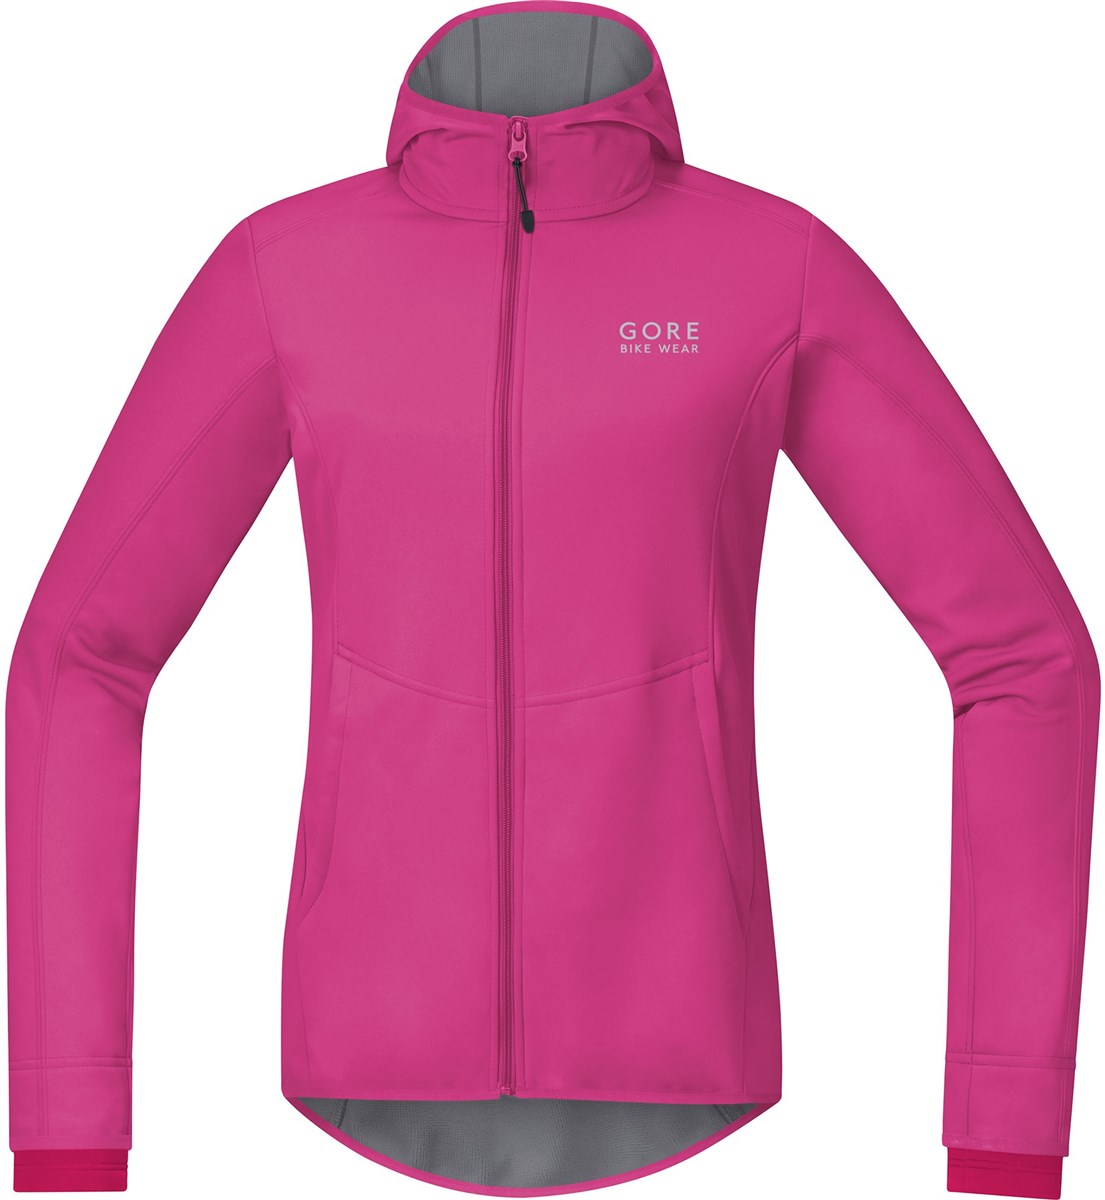 Gore E Gore Windstopper Womens Hoody AW17 product image